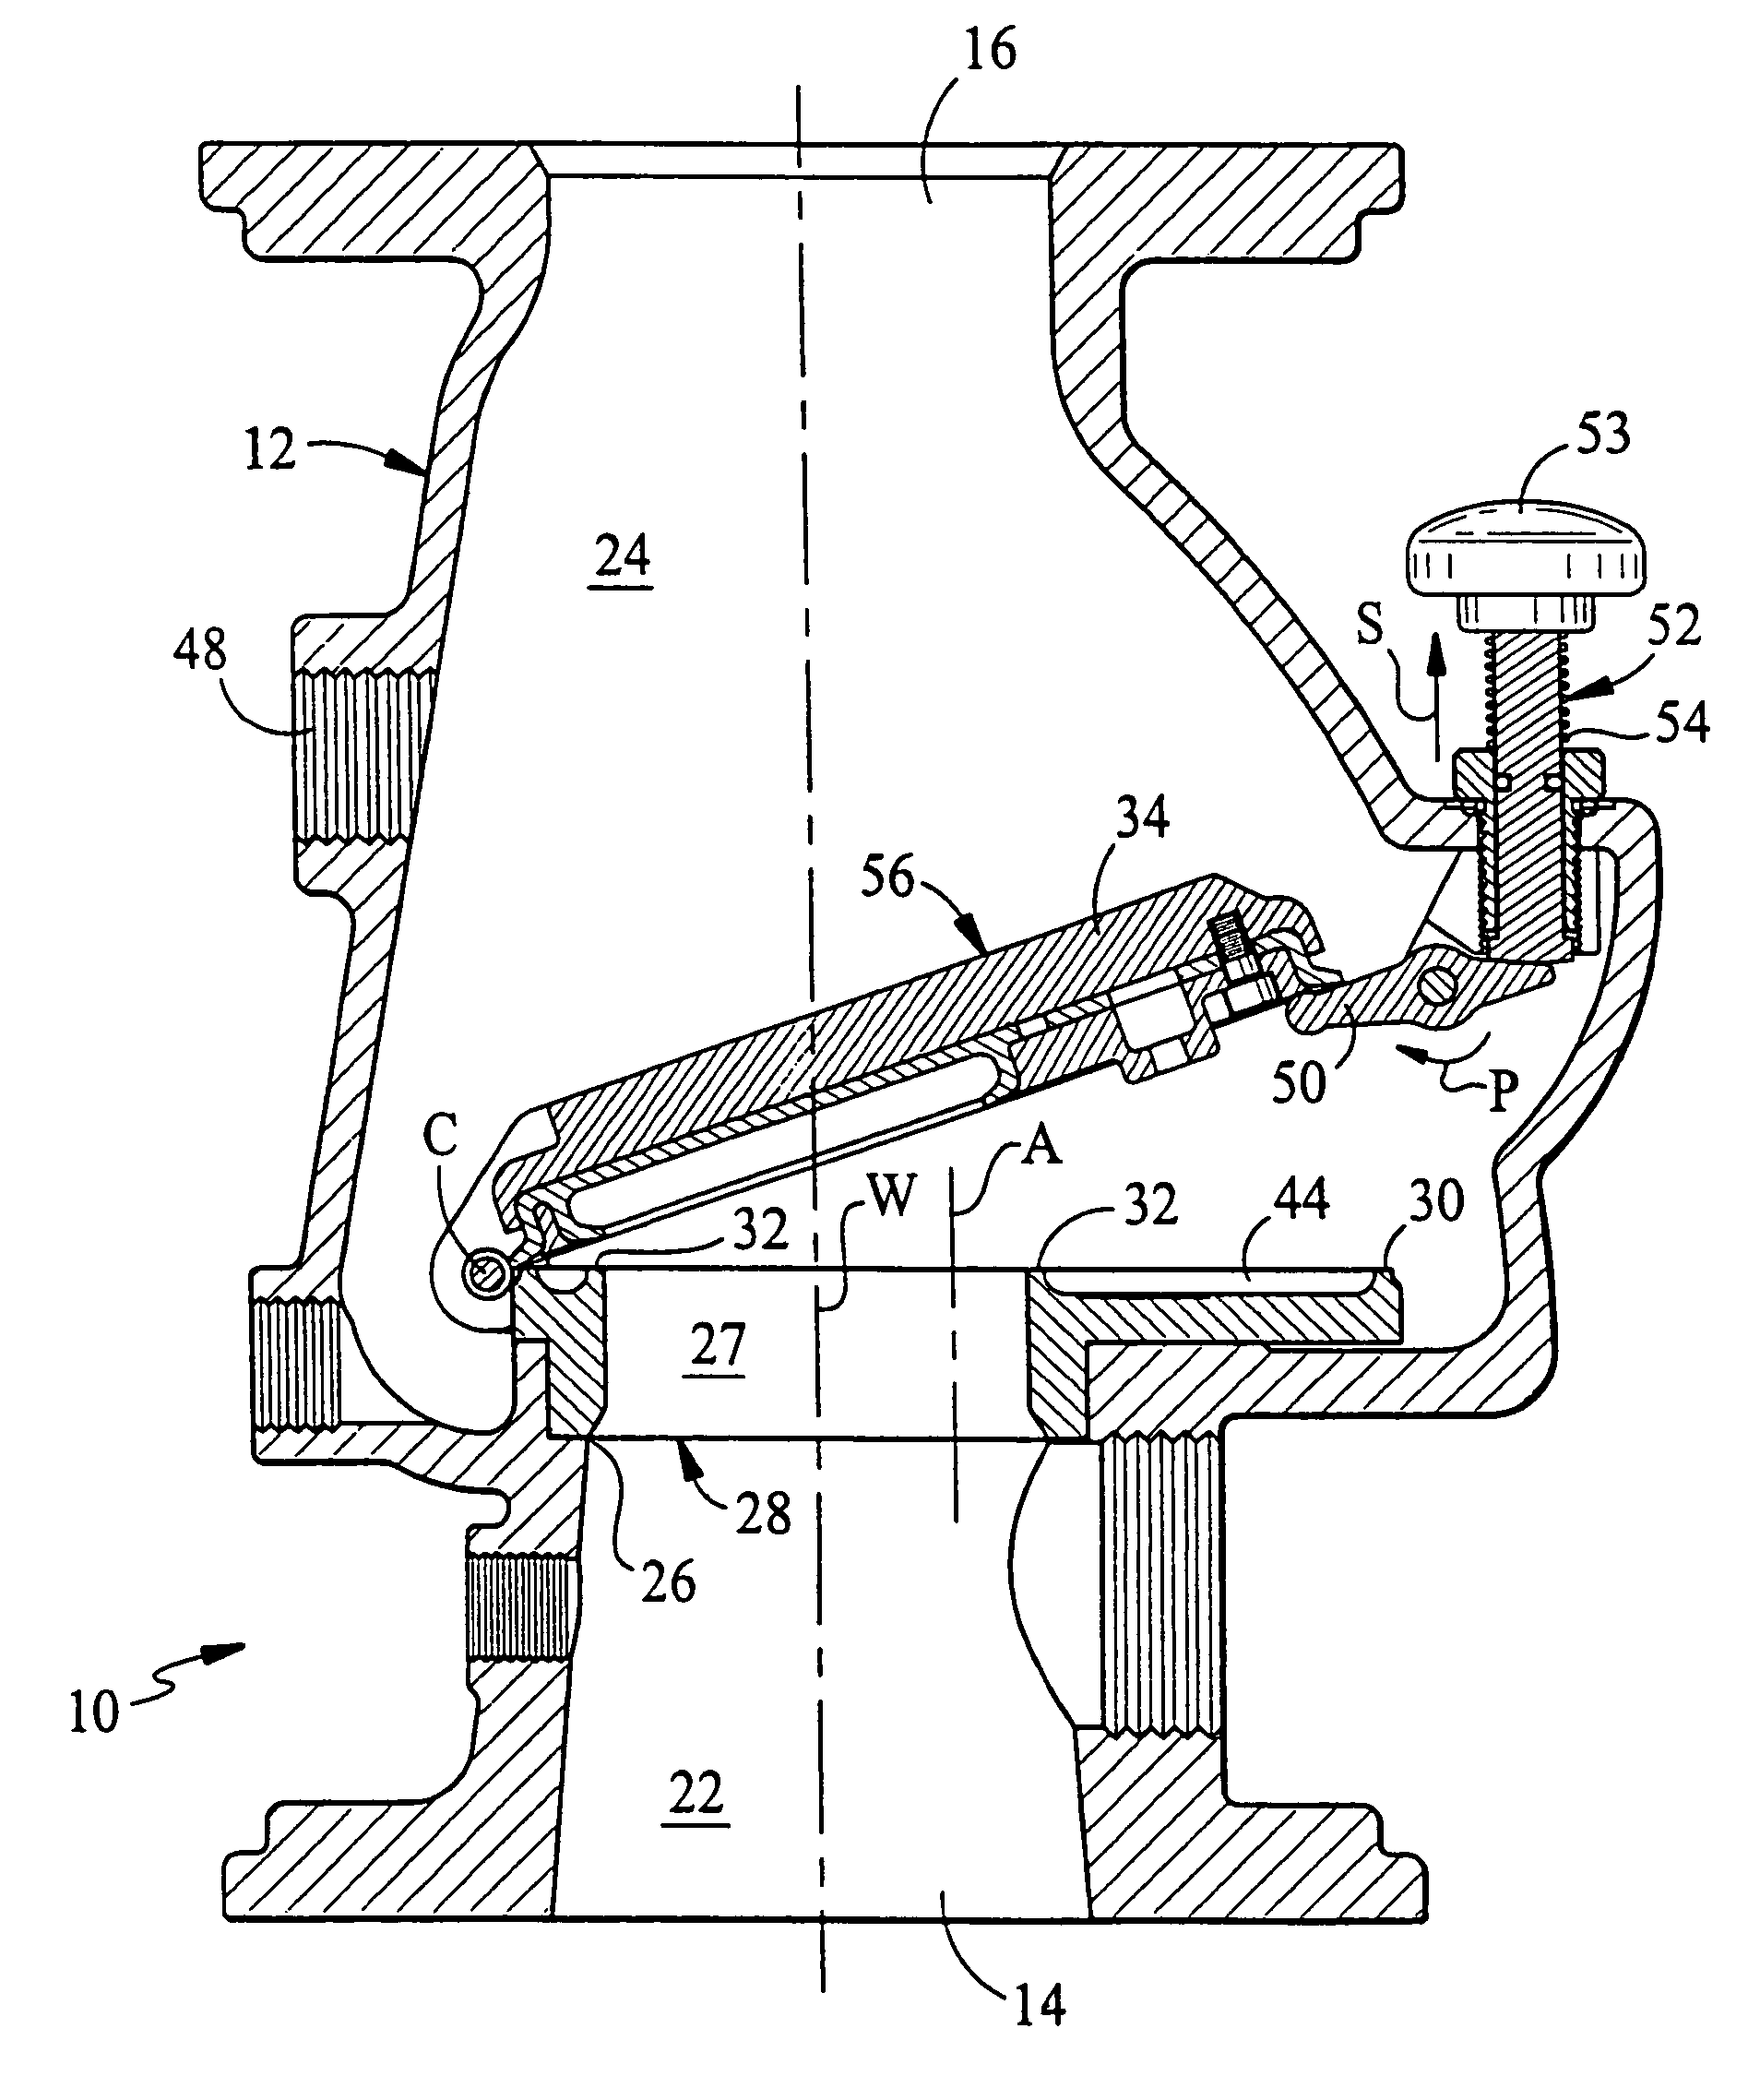 Dry pipe valve for fire protection sprinkler system